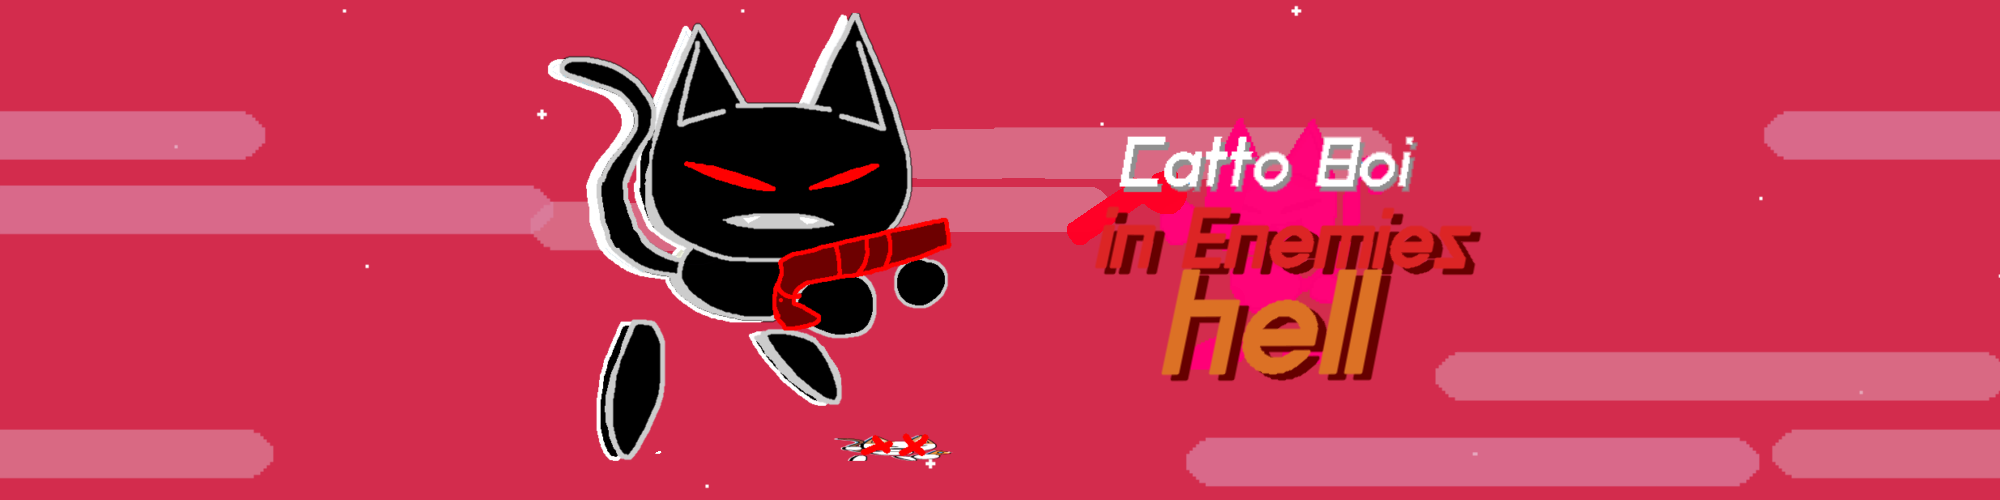 Catto boi in Enemies Hell